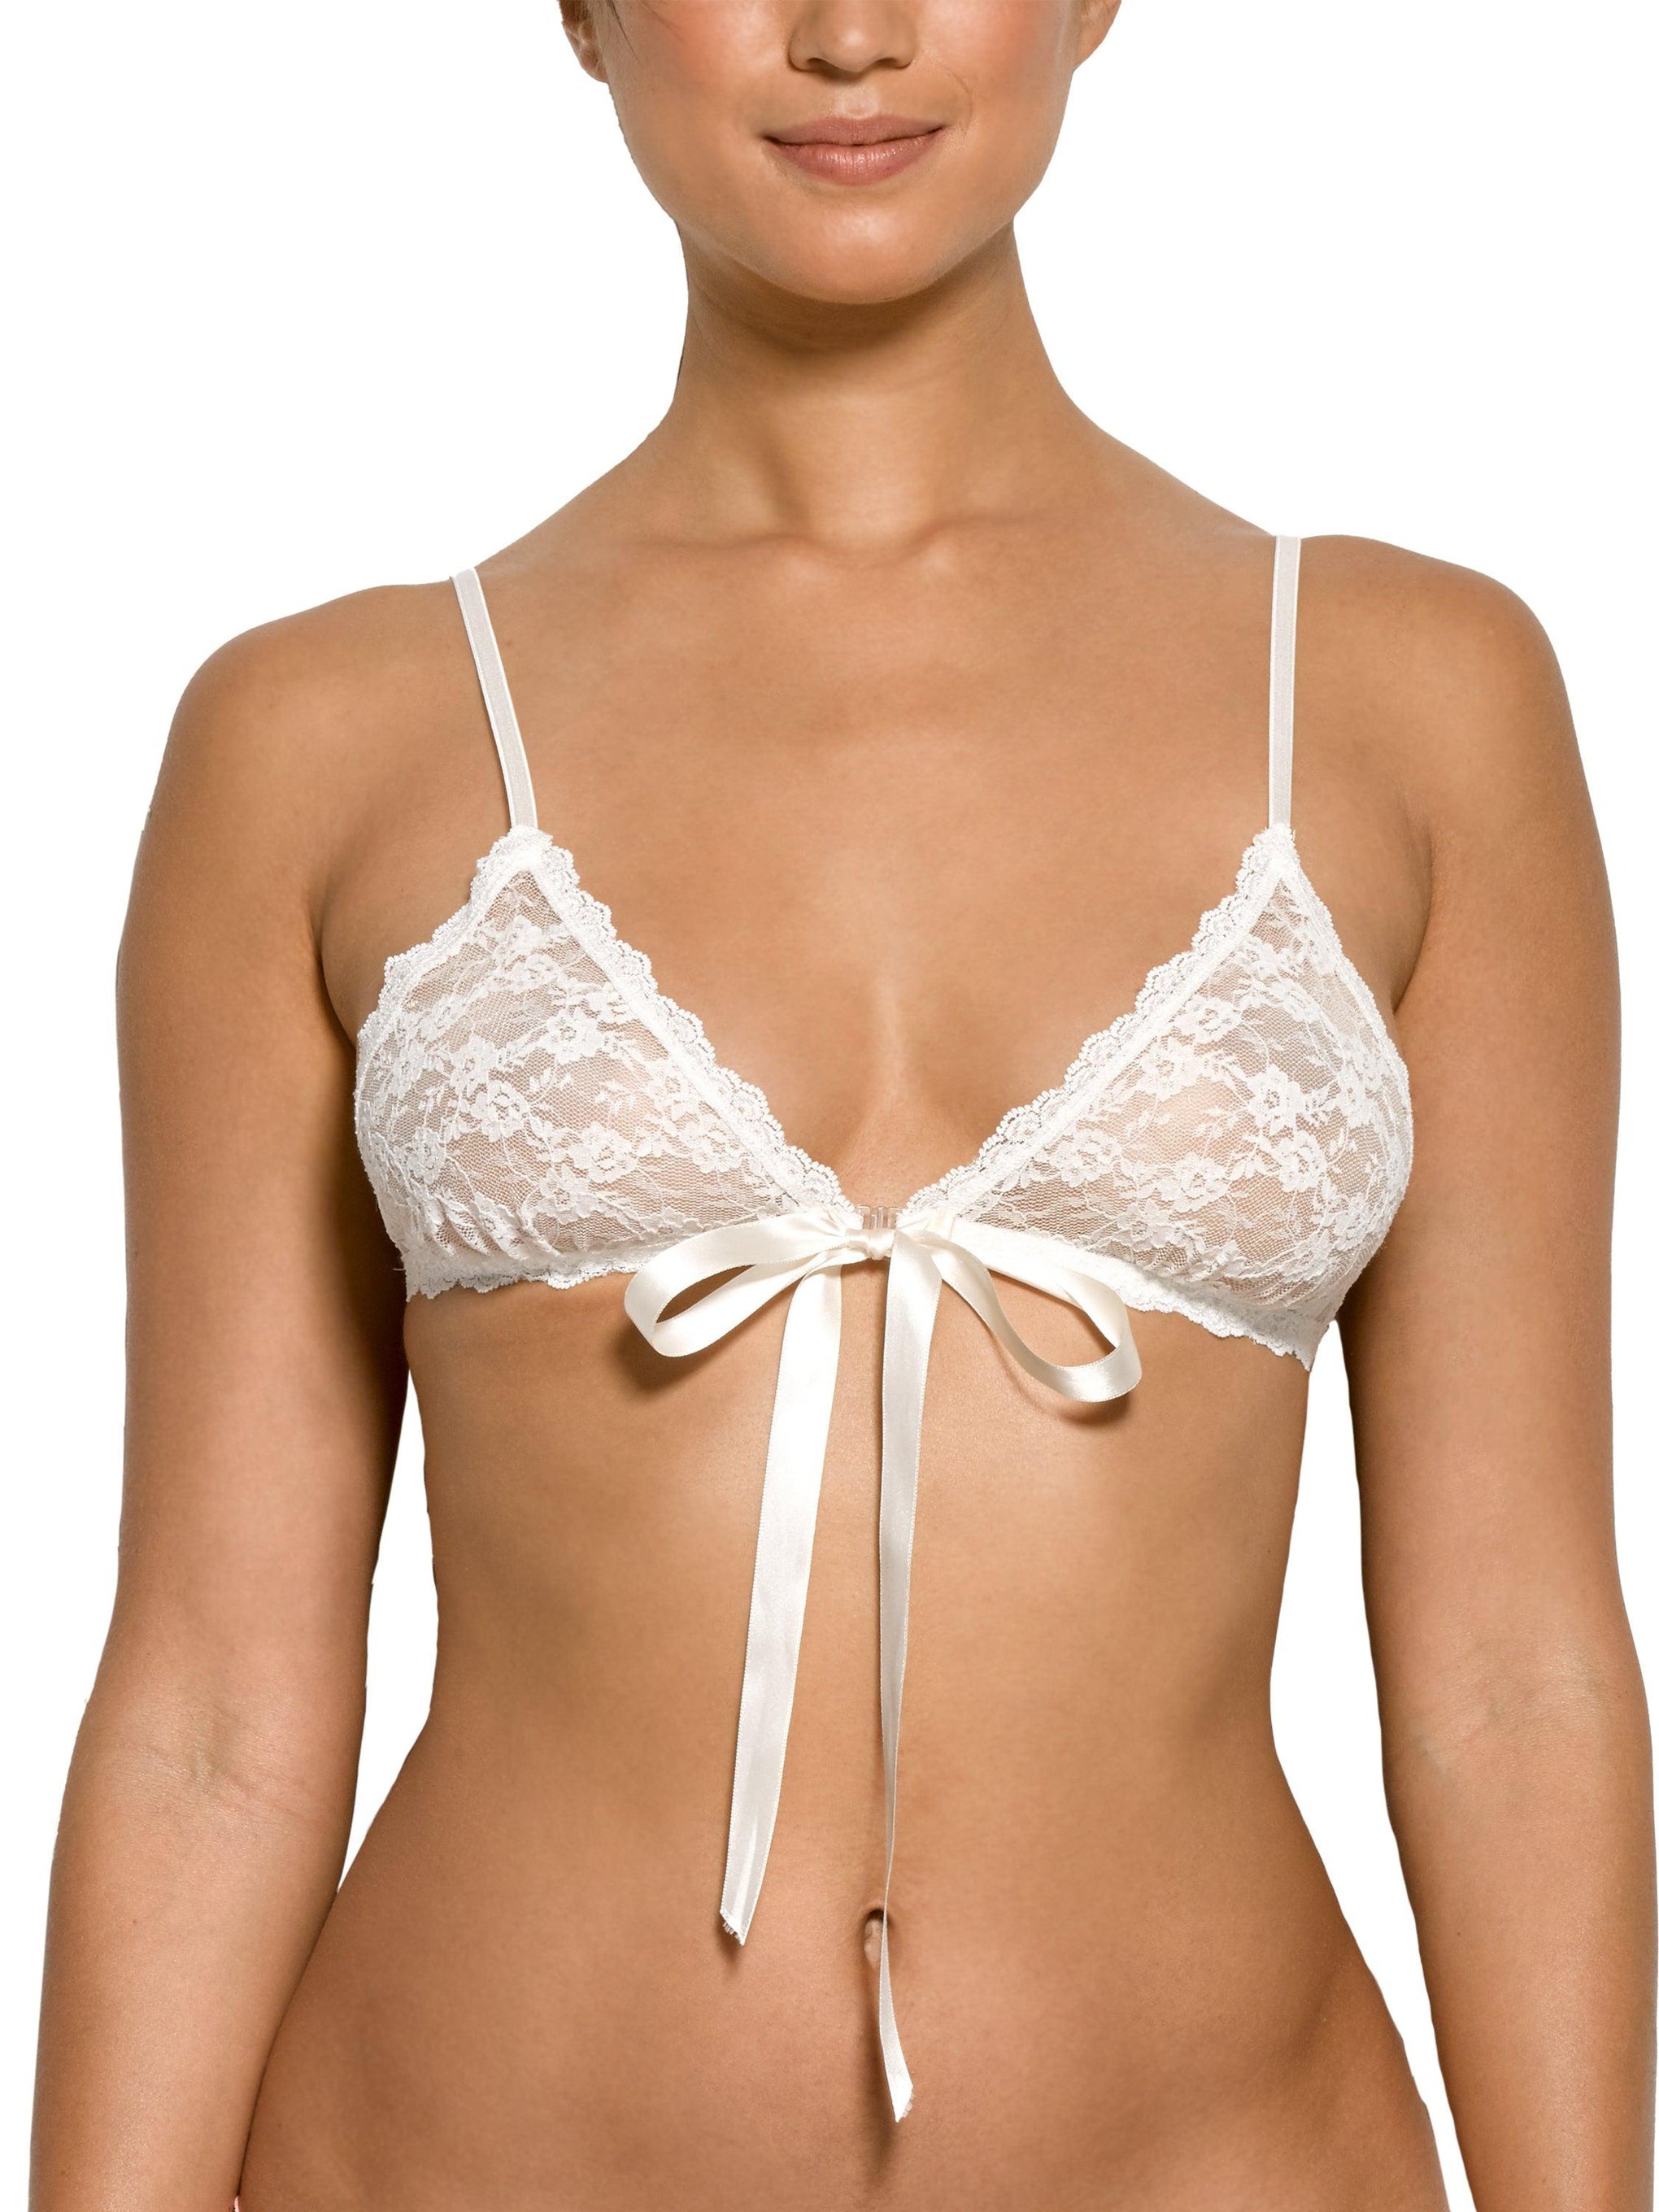 Women's Strappy Bra with Panties - Elastic Strap System / Peek-a